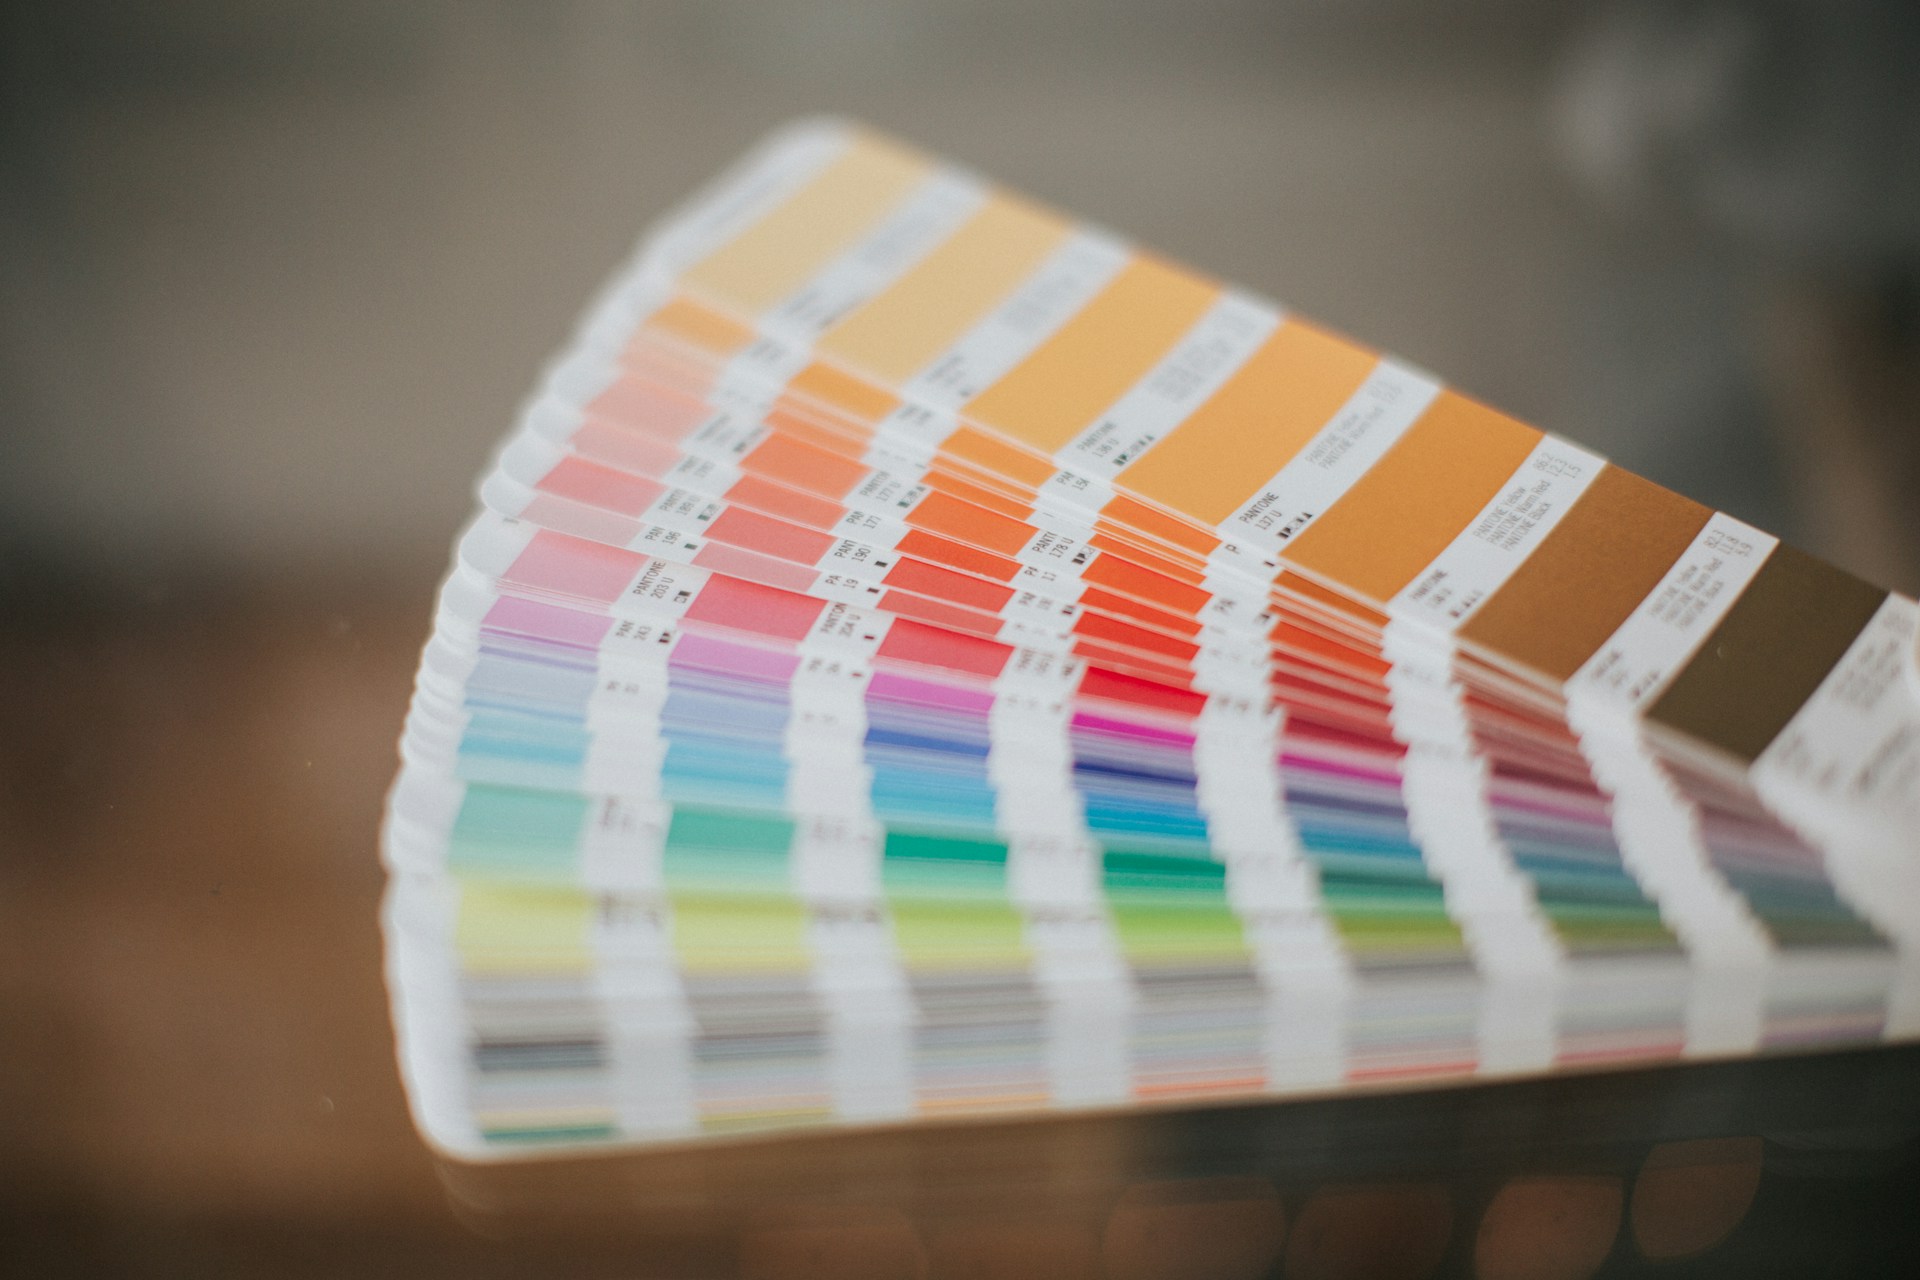 A photo of an extended fan of Pantone color swatches, used for color matching.